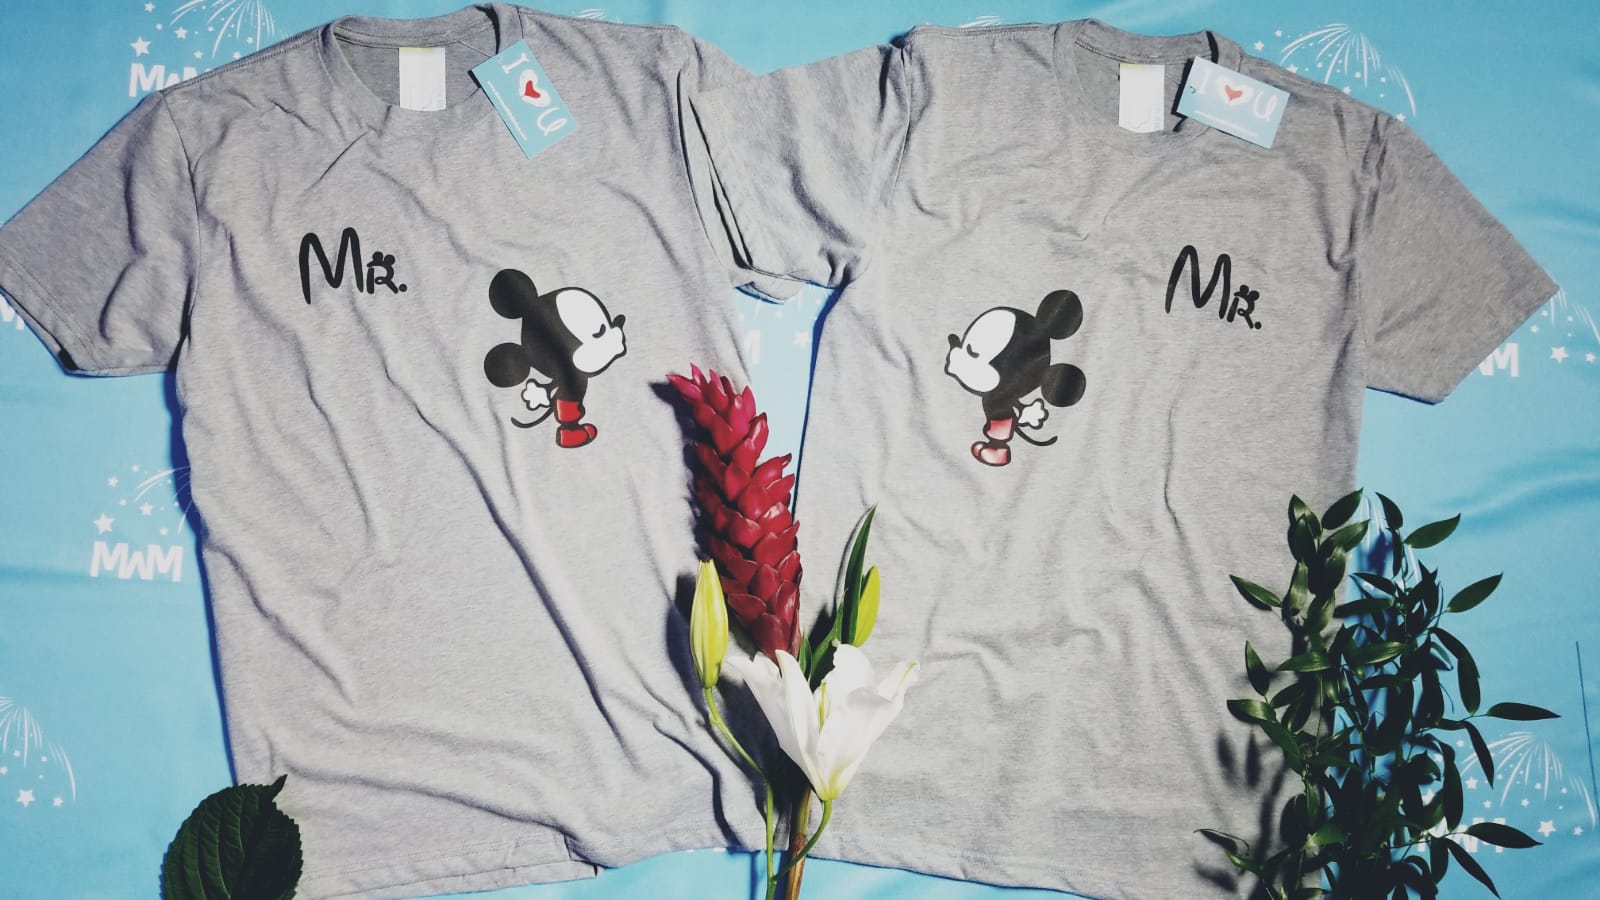 Disney LGBT Gay couple t shirts for Mr, cute kiss Mickey Mouse, Disneyland vacation trip | Married with Mickey